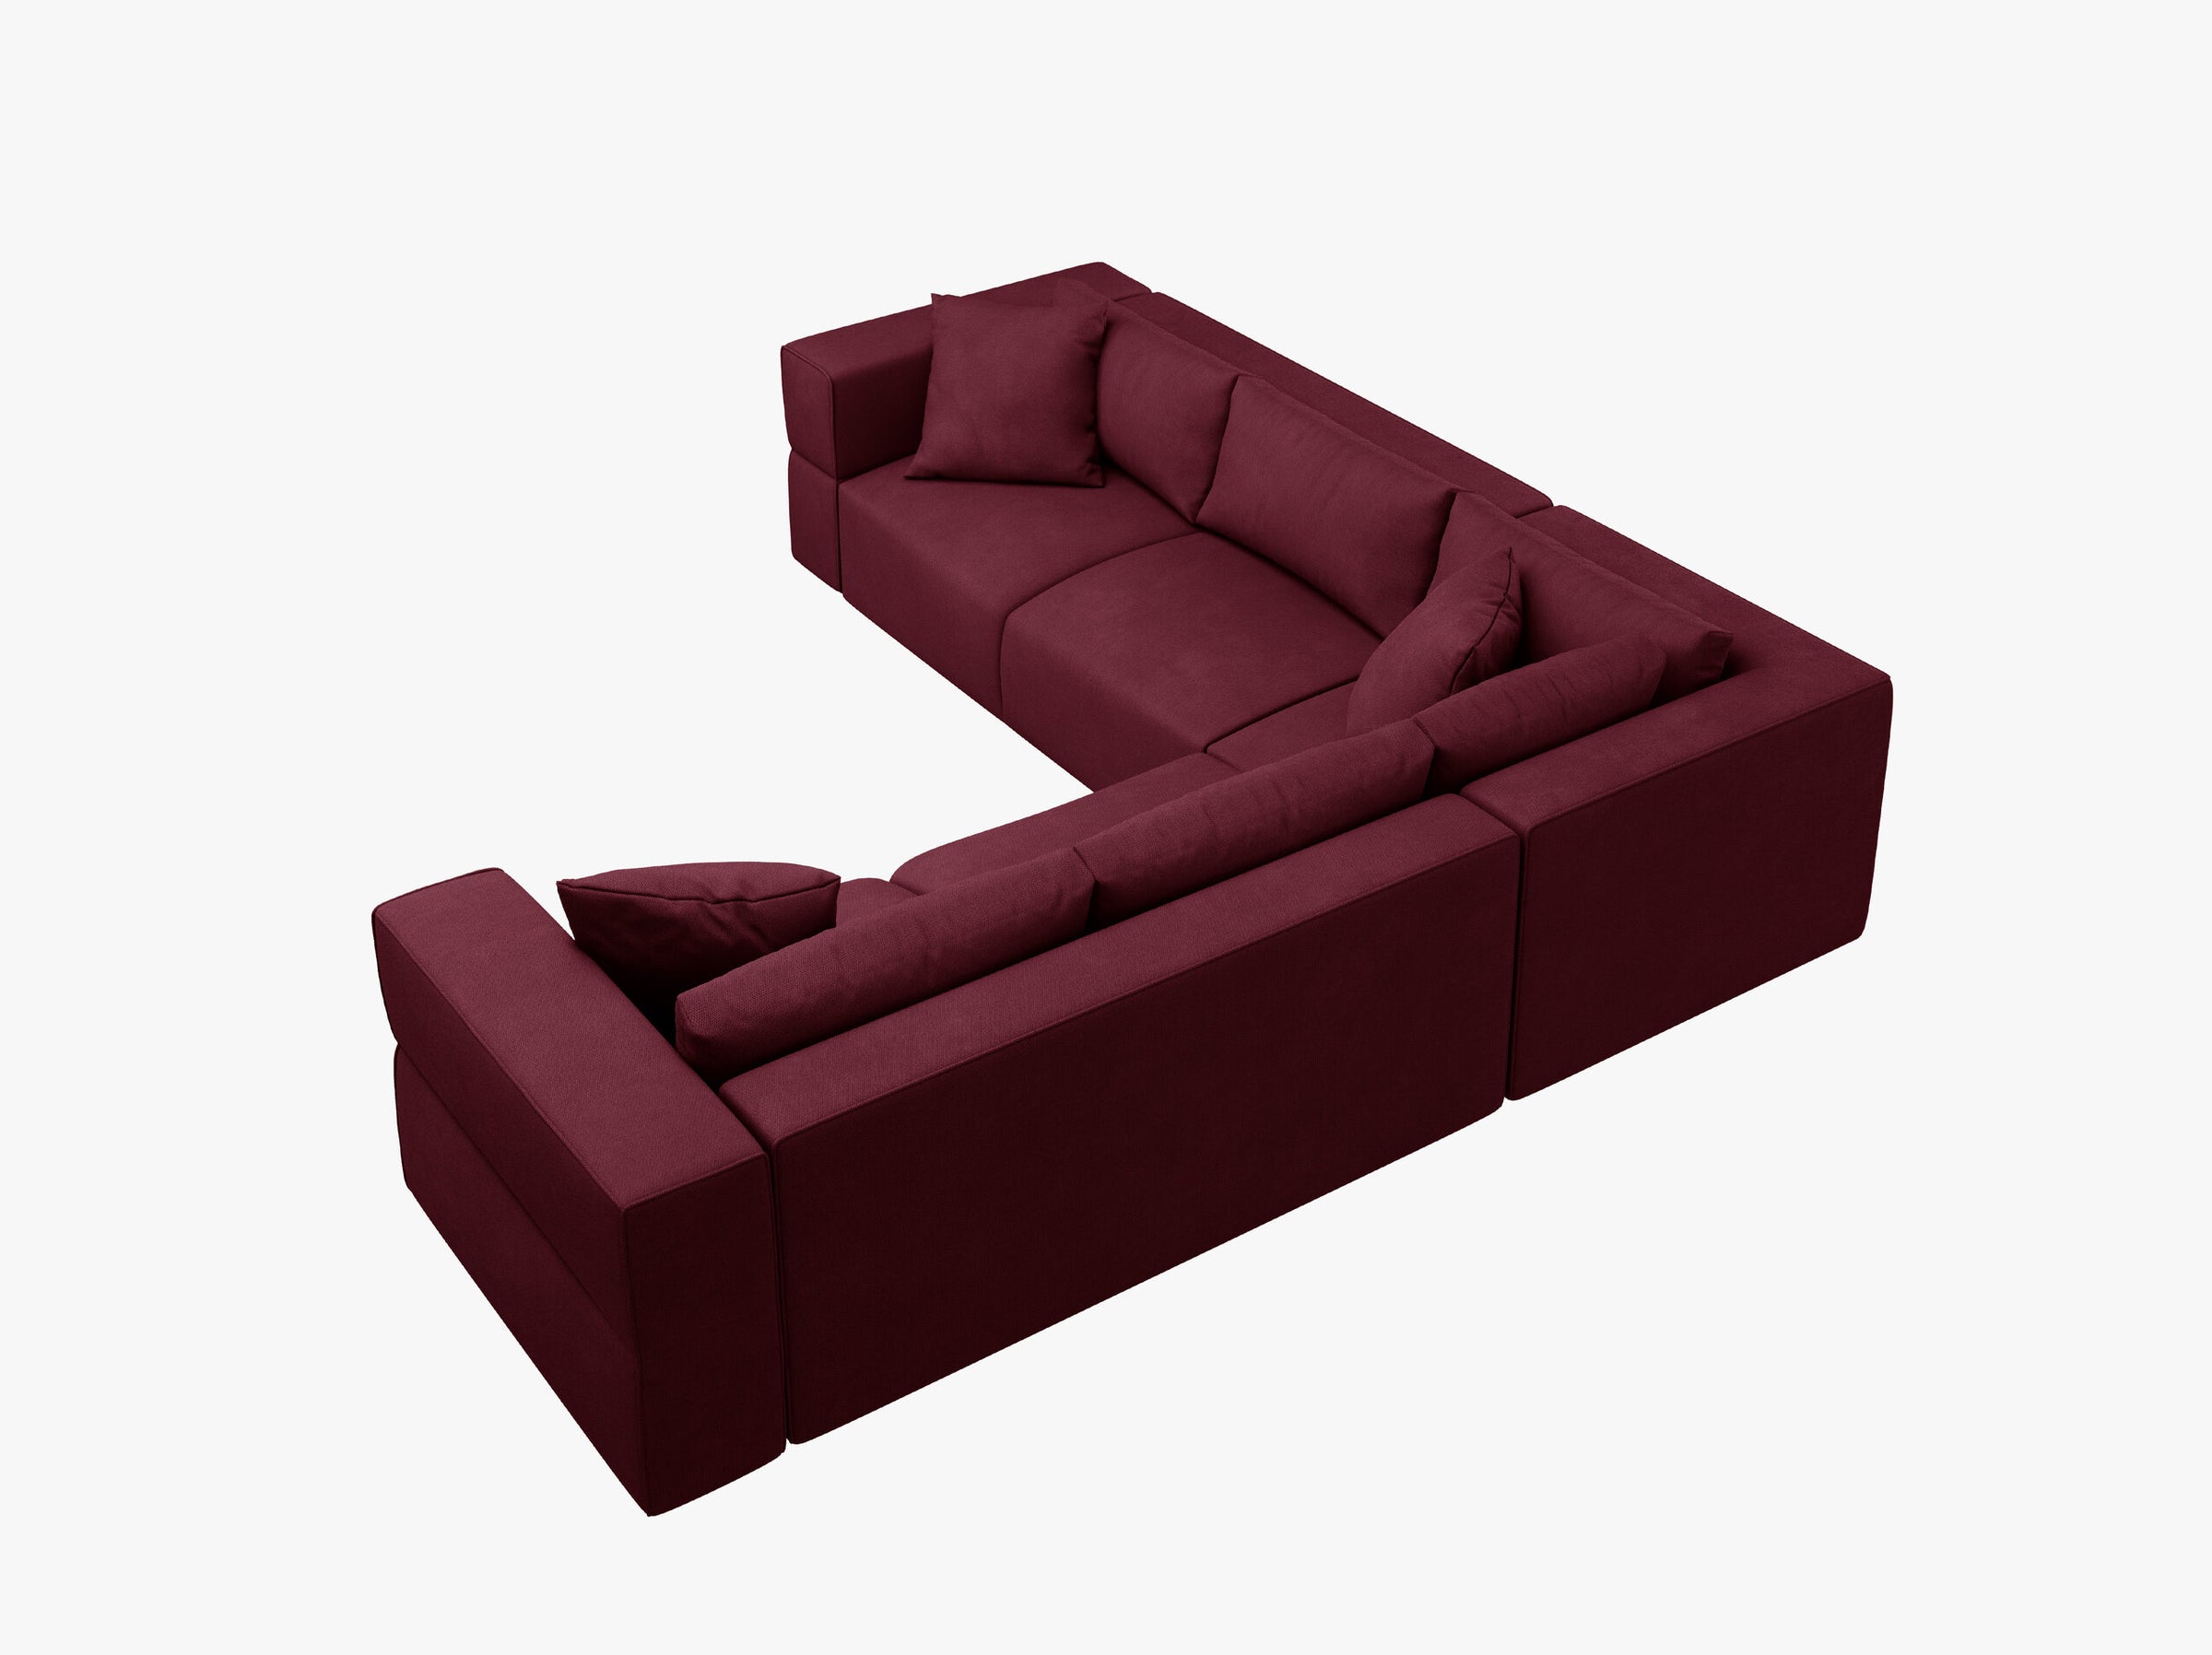 Tyra sofas structured fabric bordeaux